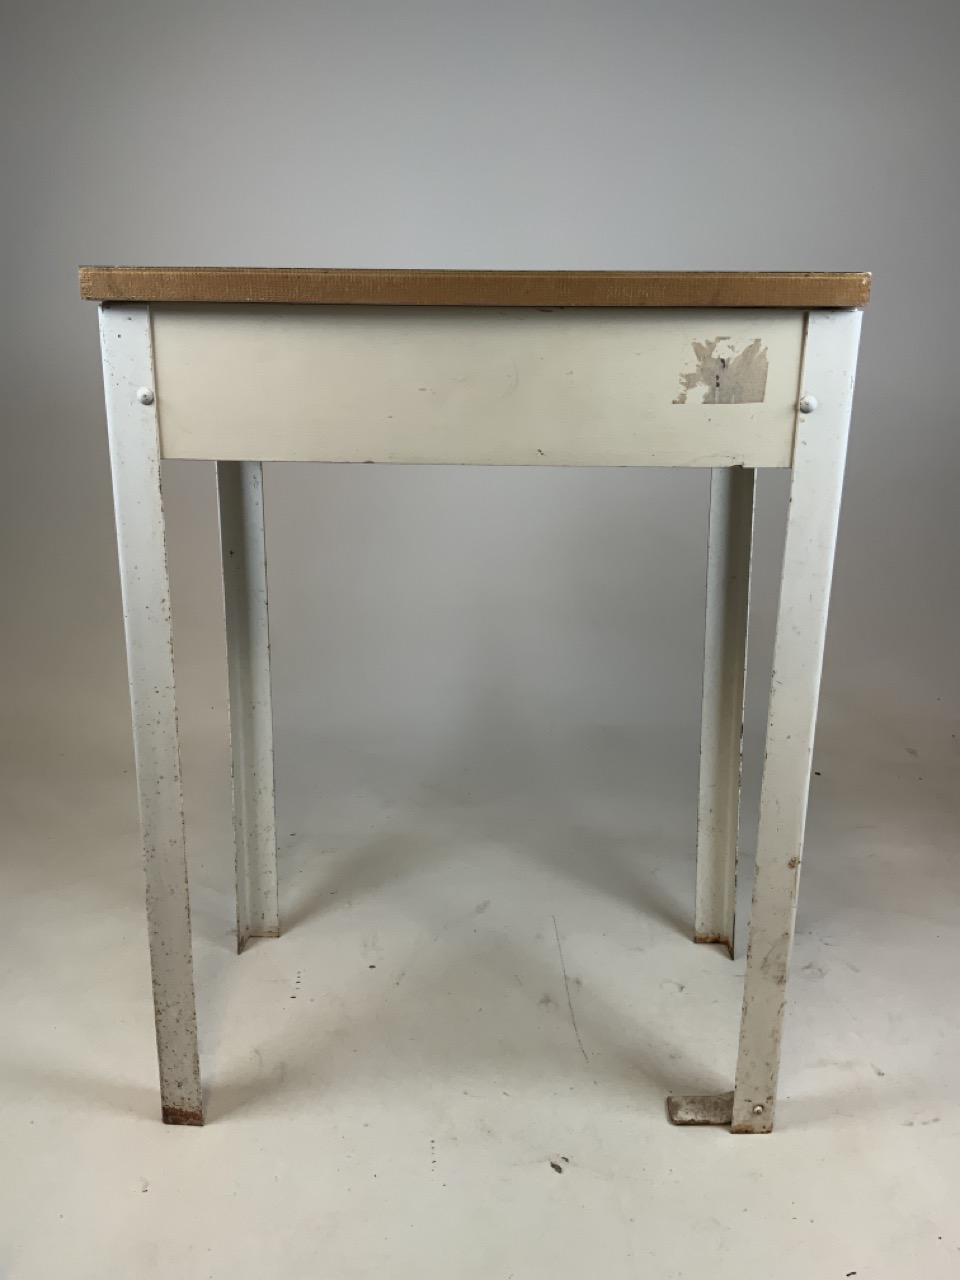 A mid century Qualcast foldaway WRINGER with metal legs, formica top and metal winding handle. W: